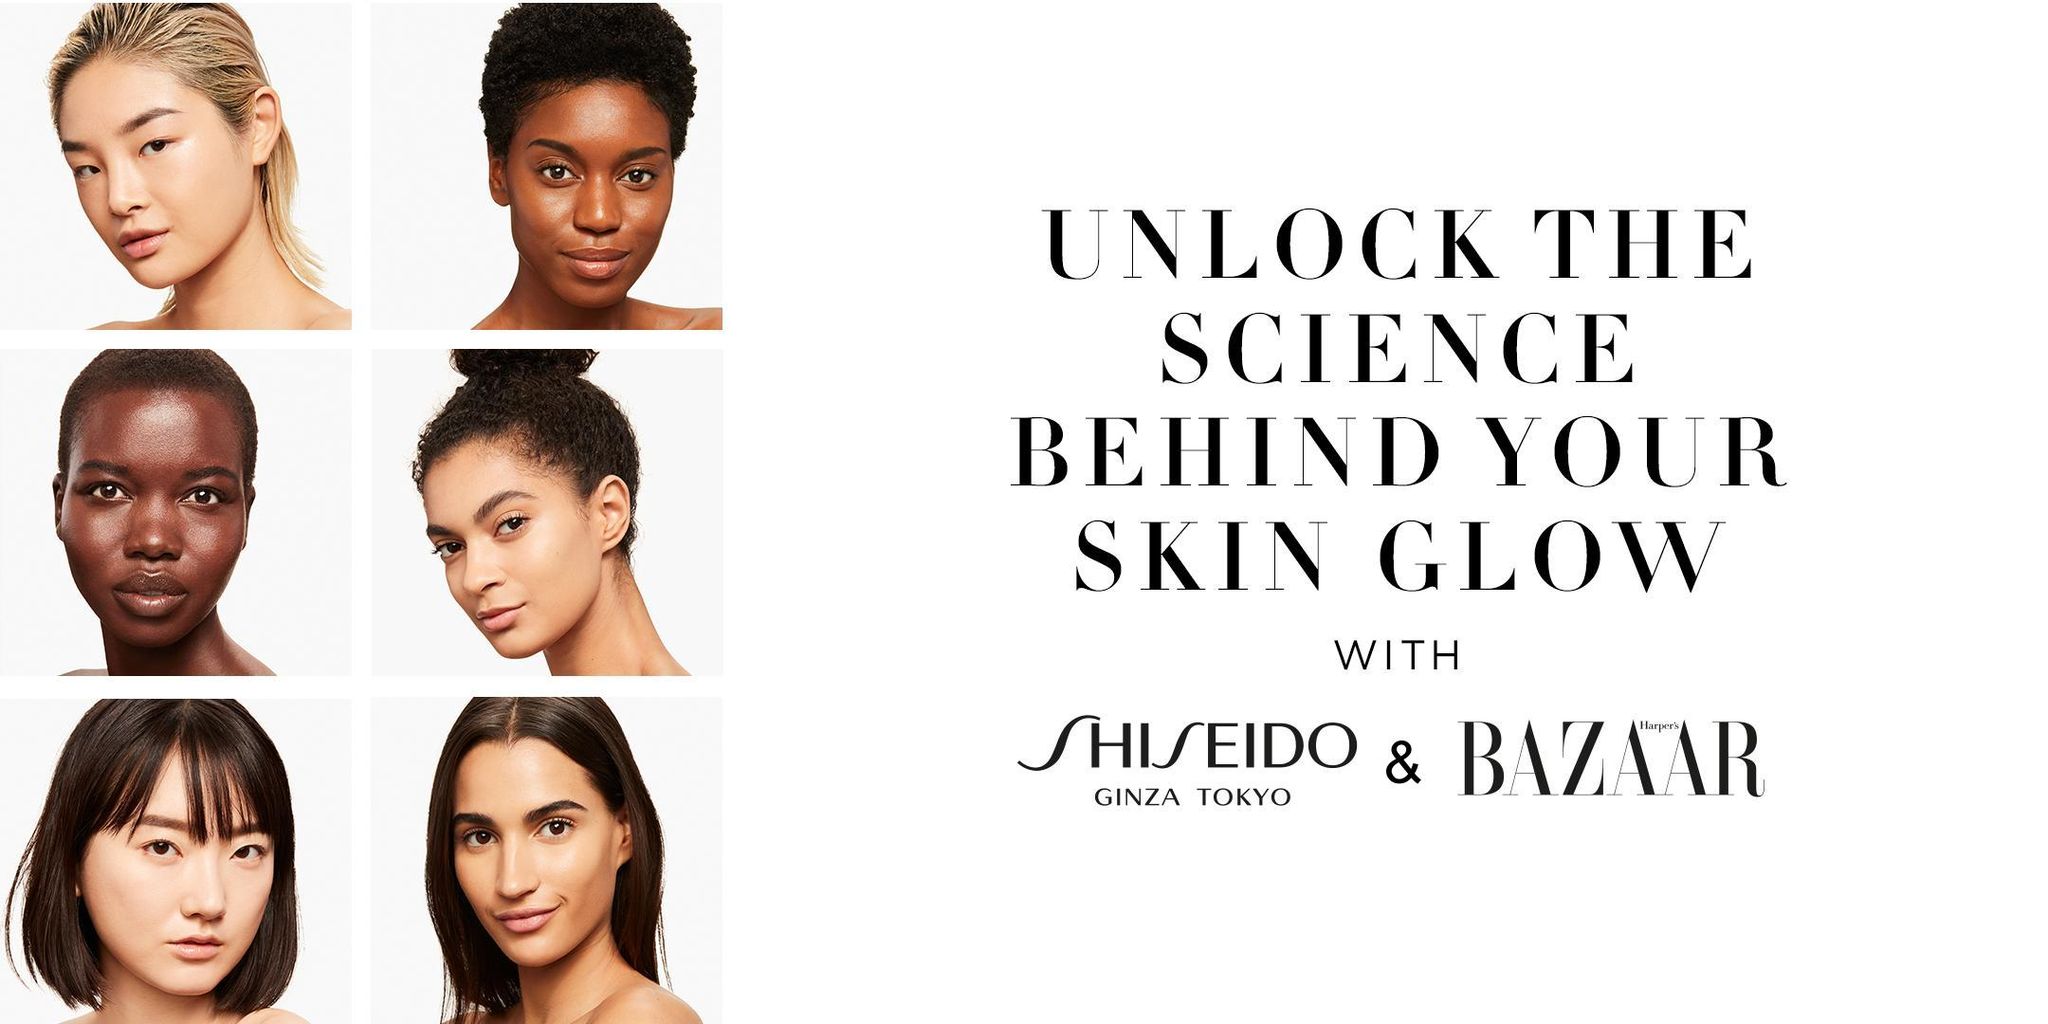 unlock the science behind your skin glow